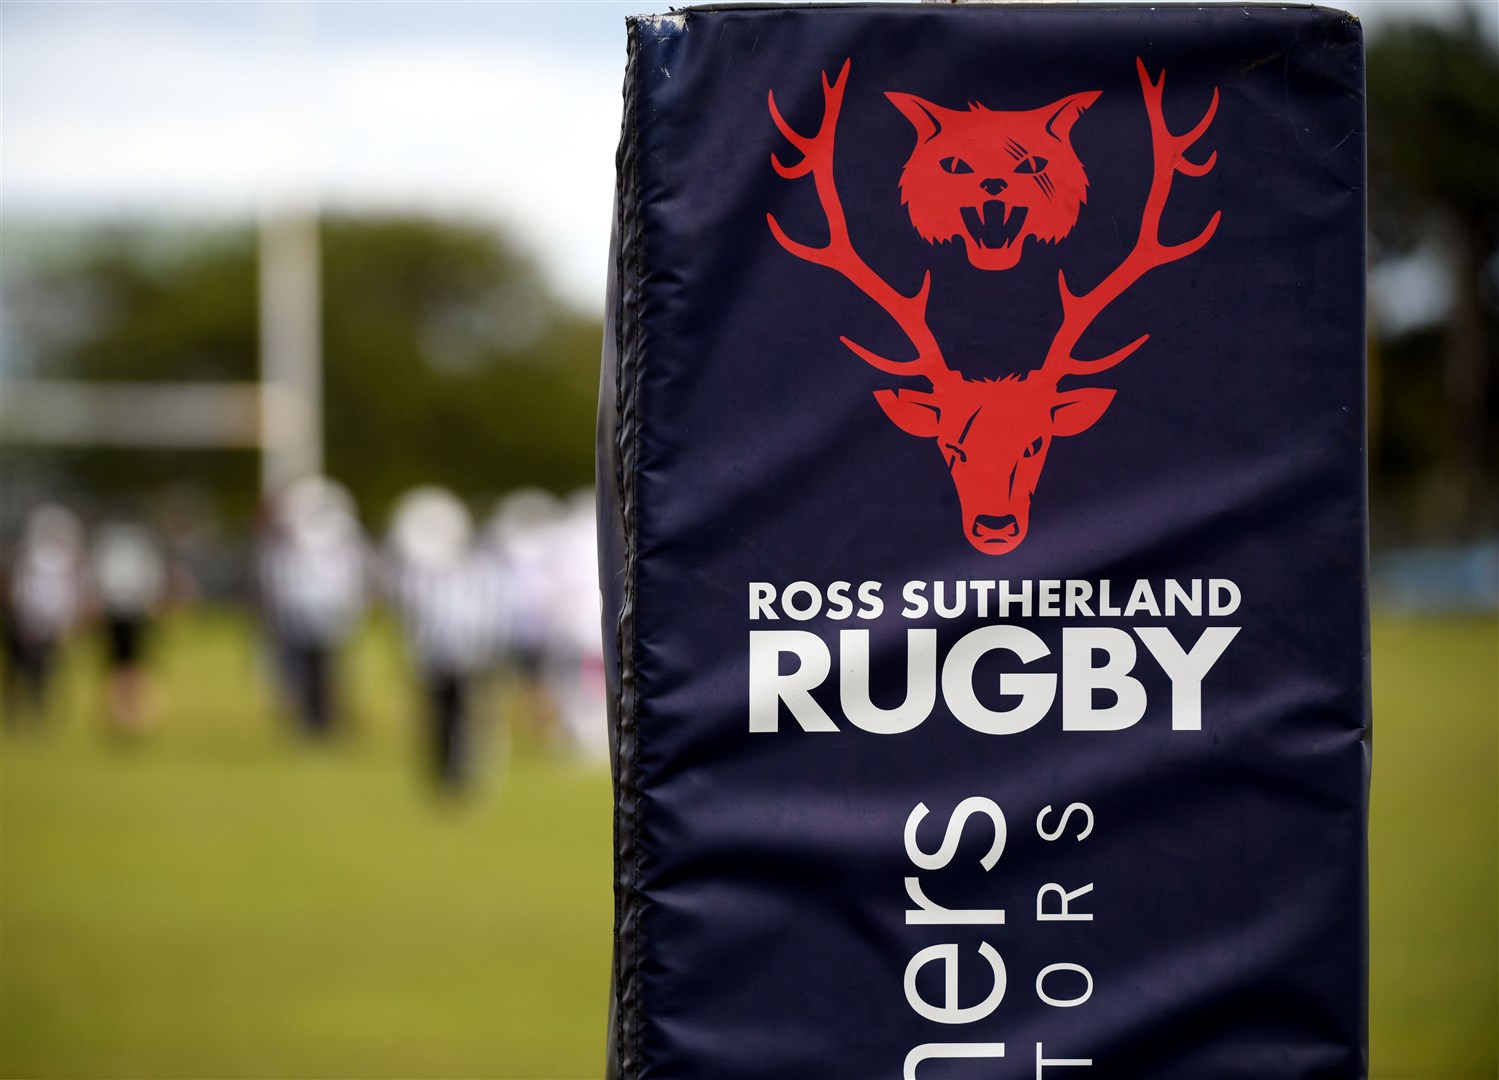 Ross Sutherland Rugby Club locator. Picture: James Mackenzie.